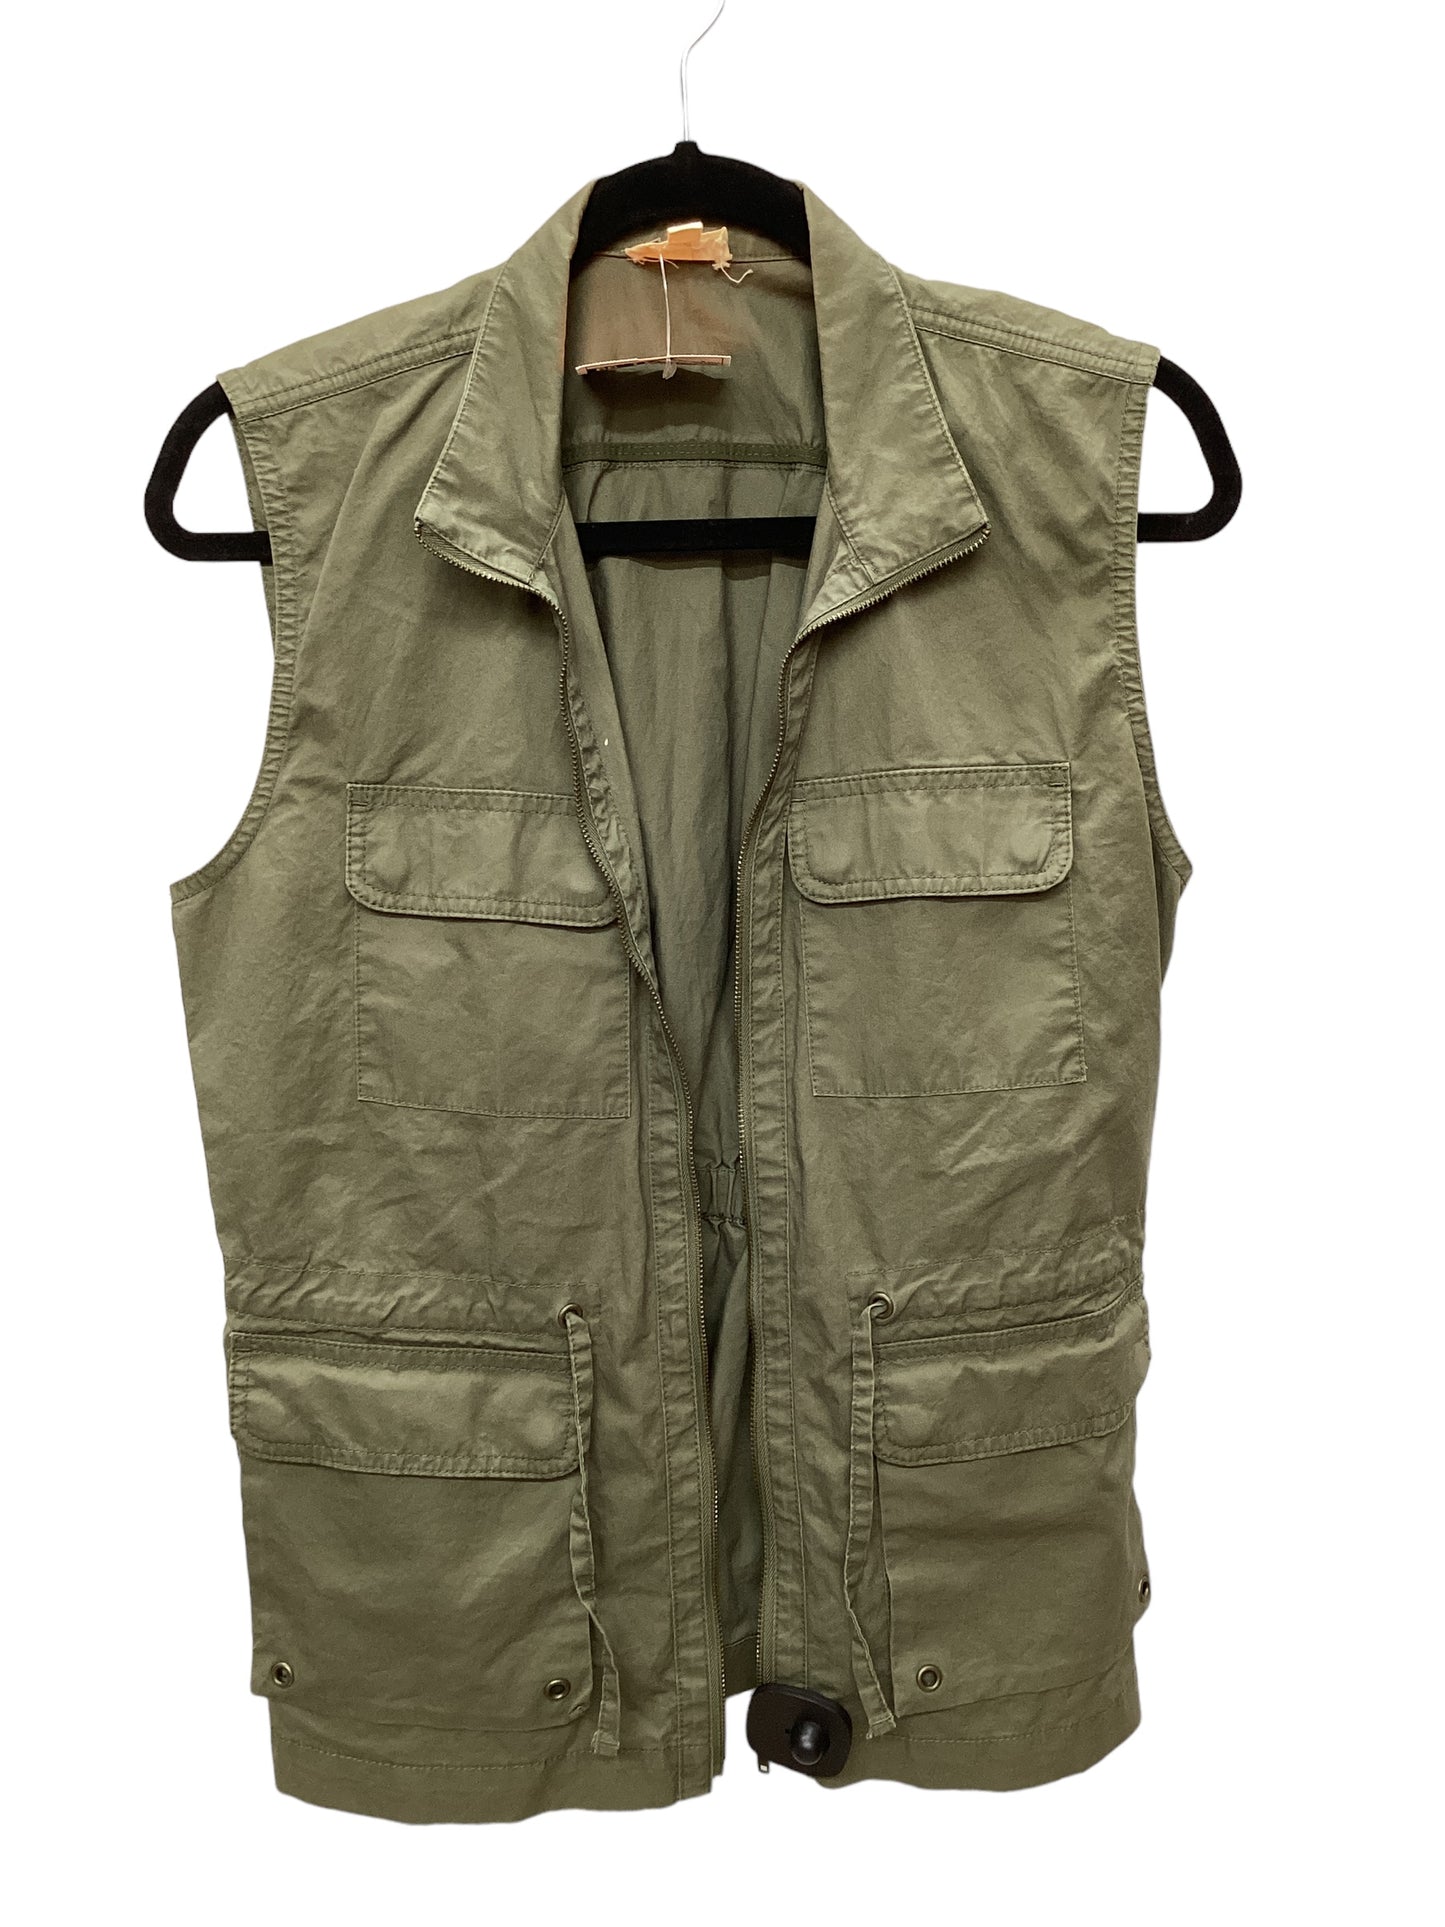 Vest Other By Clothes Mentor  Size: S